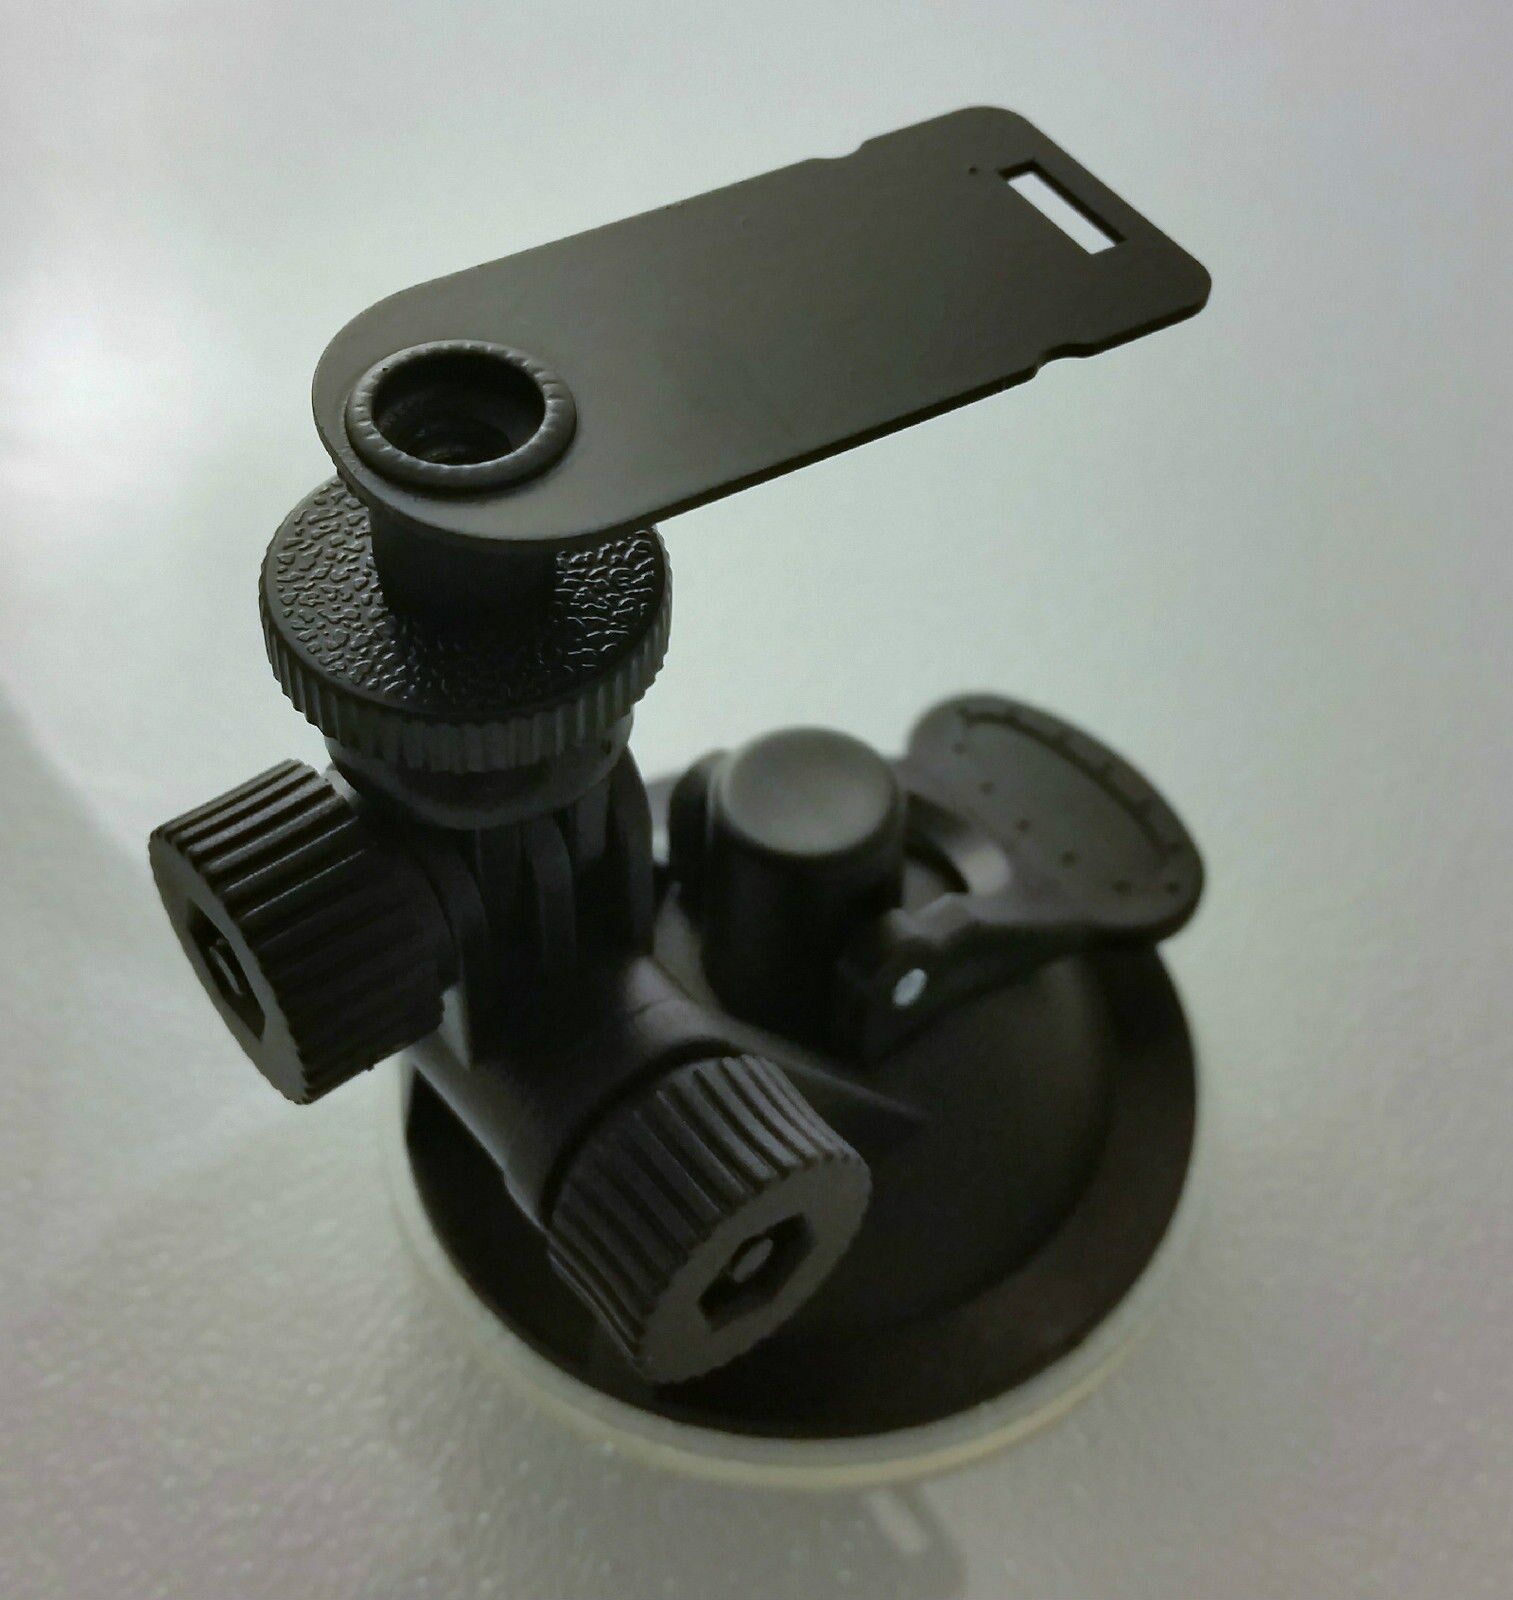 New - Cobra Radar Detector Windshield Mount Large Suction Cup -2 Axis   (pvt-c)